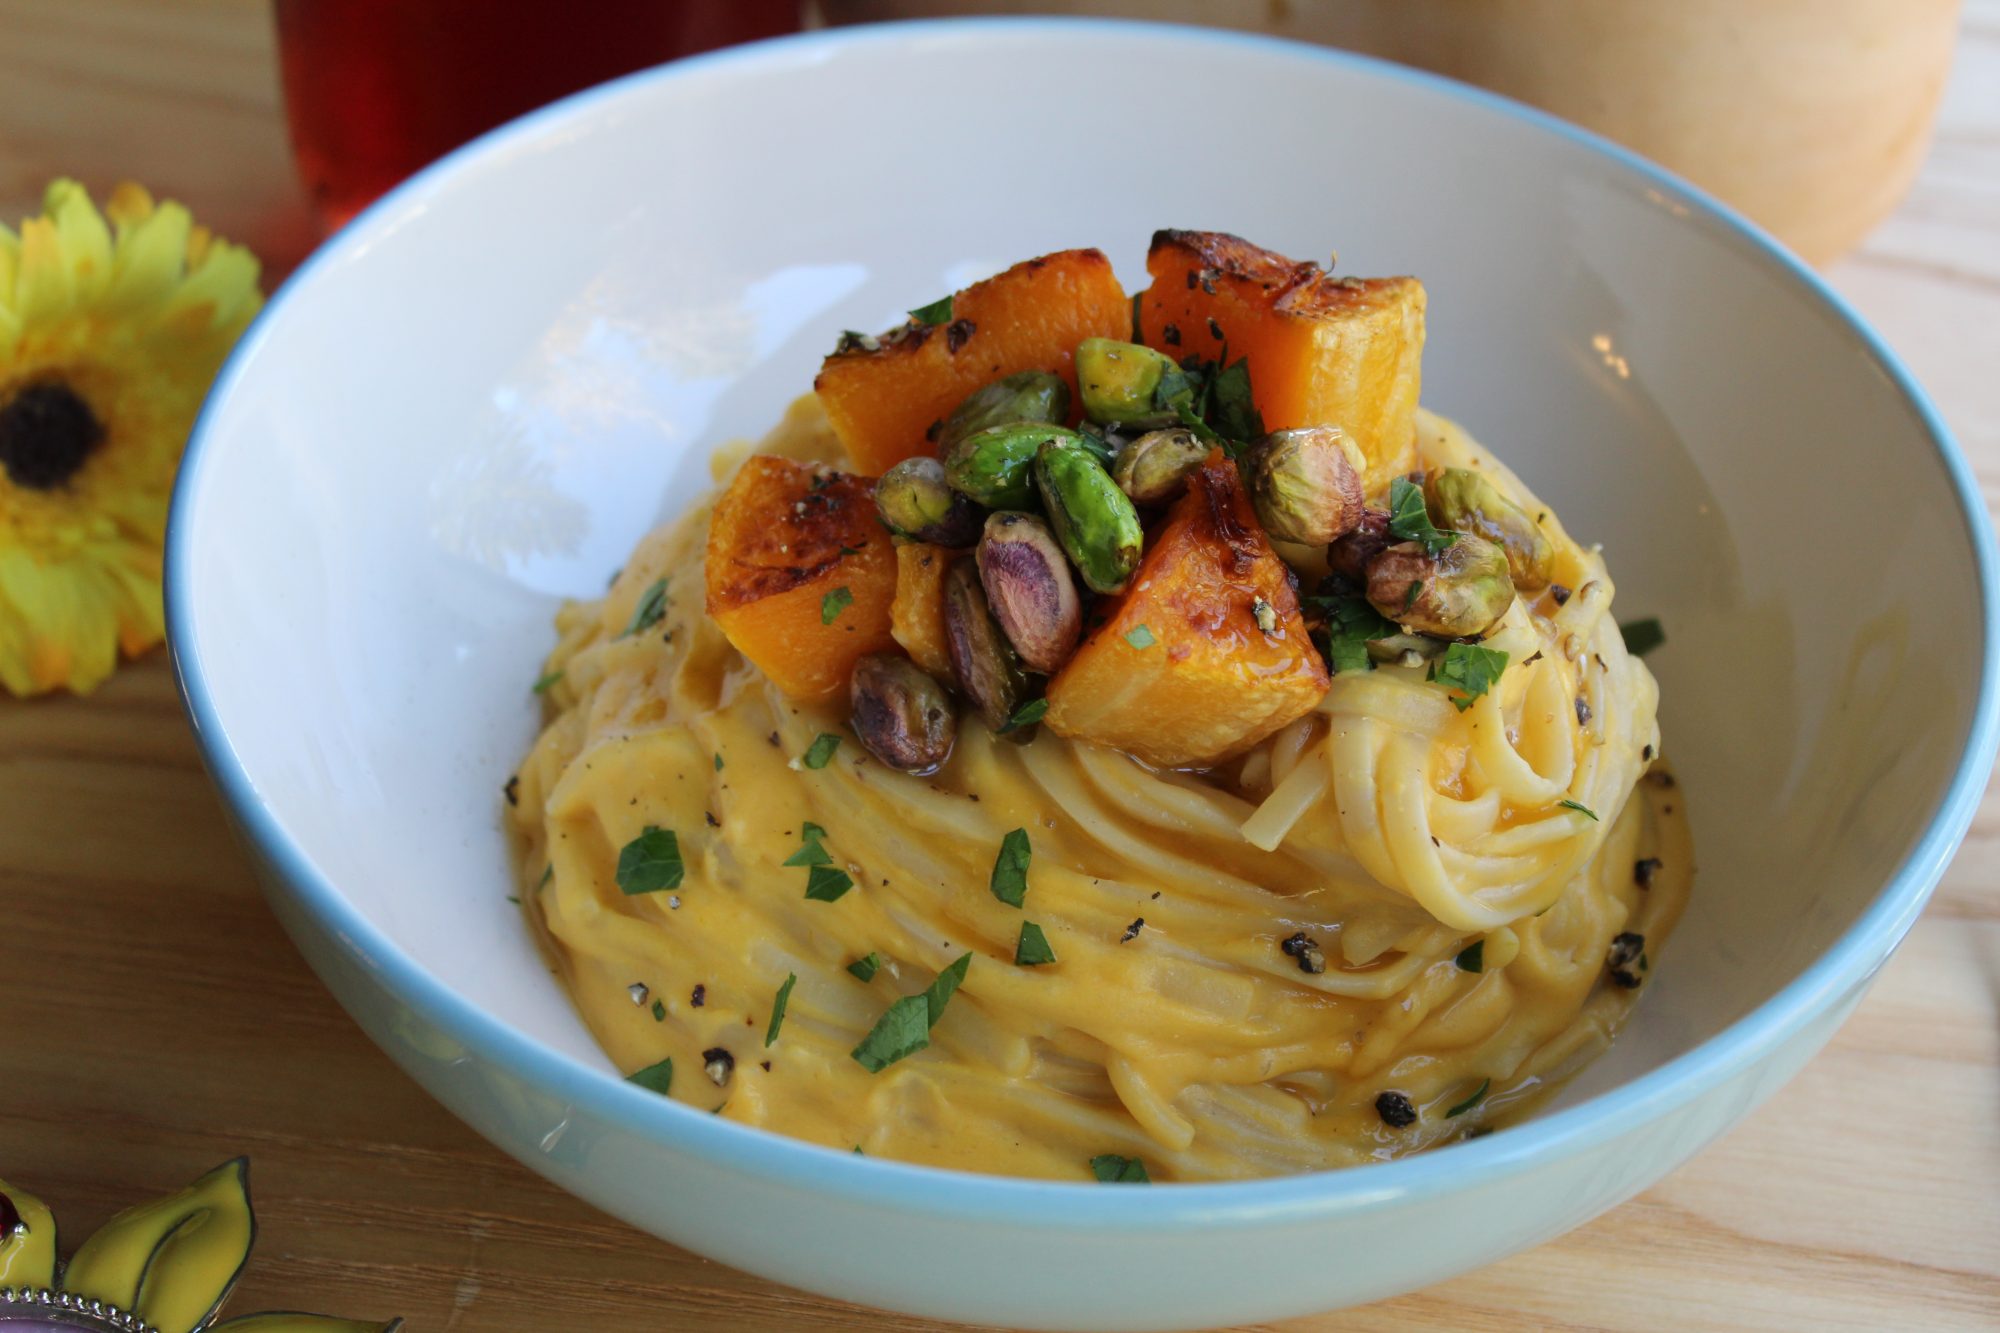 CREAMY BUTTERNUT SQUASH ALFREDO PASTA WITH BROWN BUTTER AND PISTACHIOS